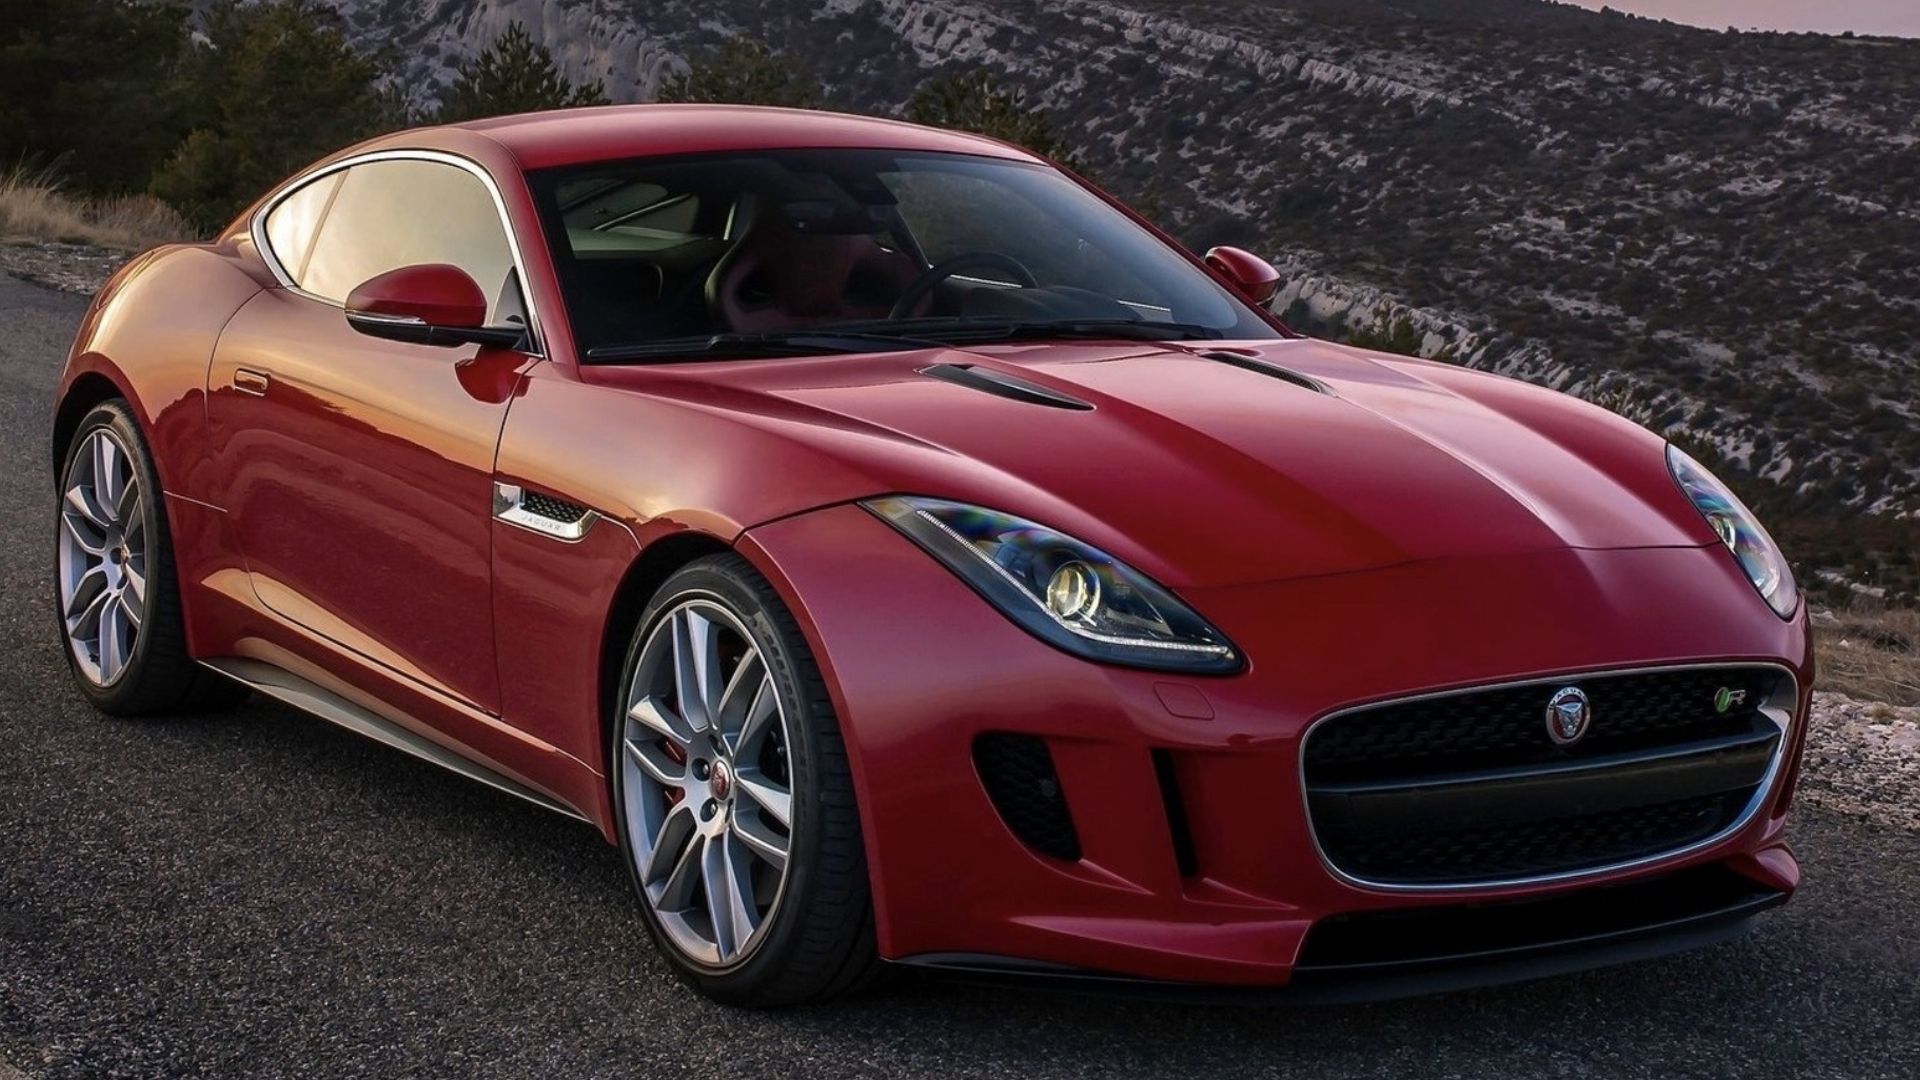 2015 Jaguar F-TYPE Coupe in red posing on mountain road